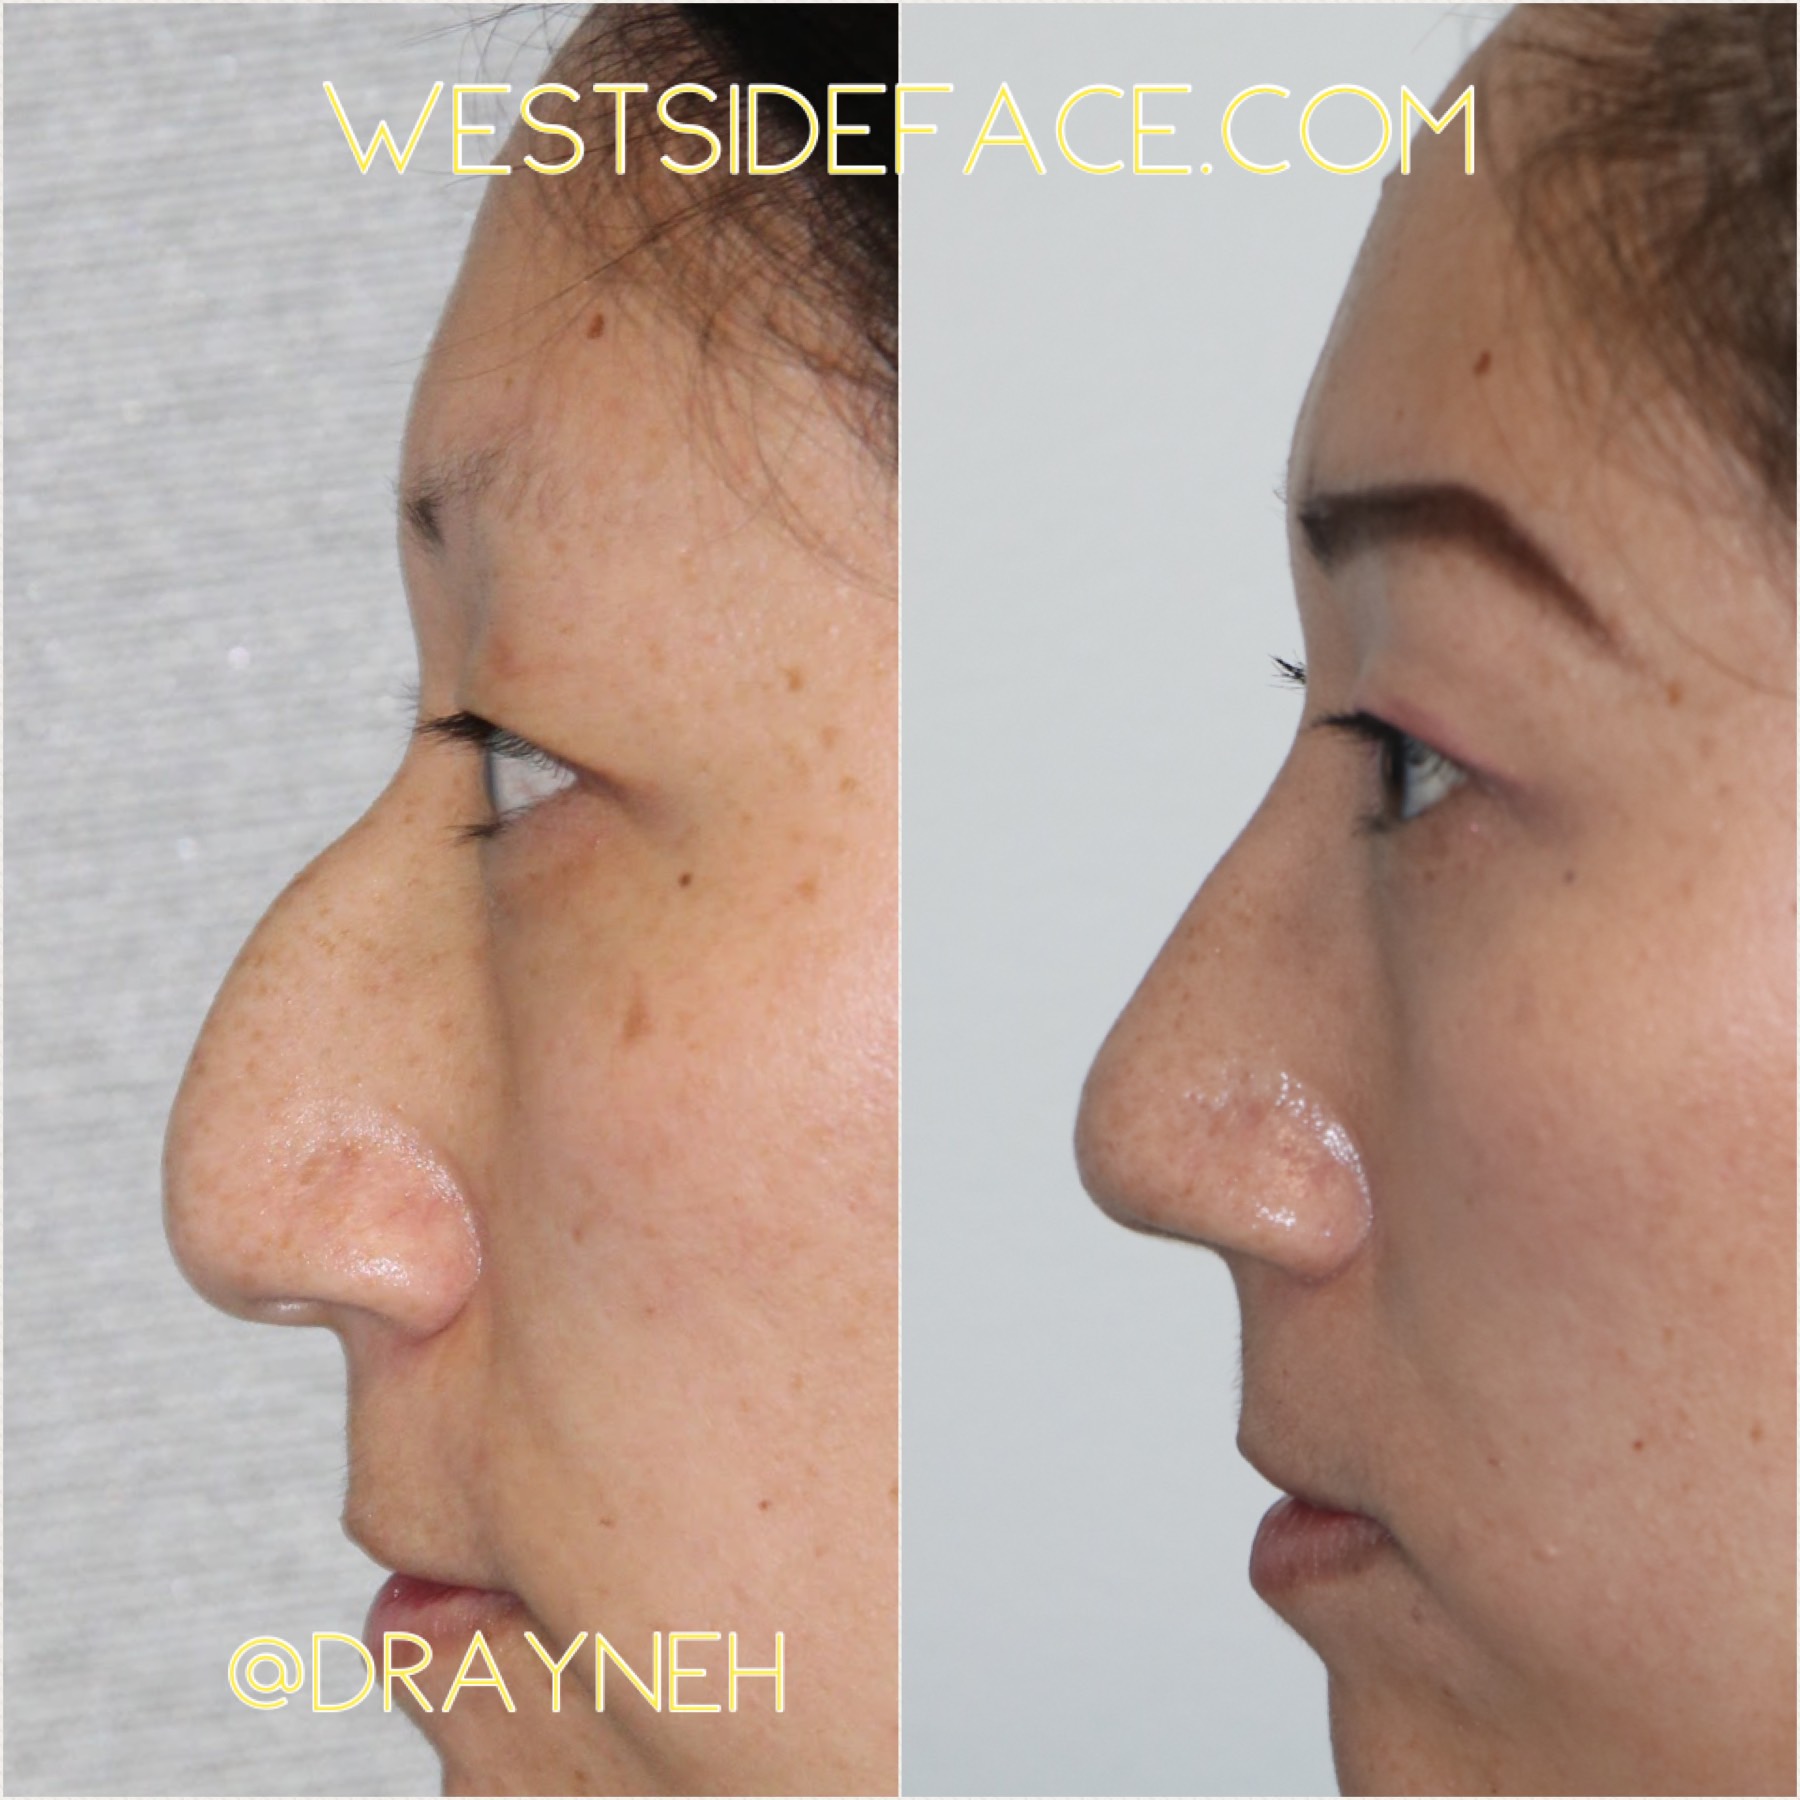 Closed Scarless Ethnic Rhinoplasty And Crooked Nose Repair Westside Face